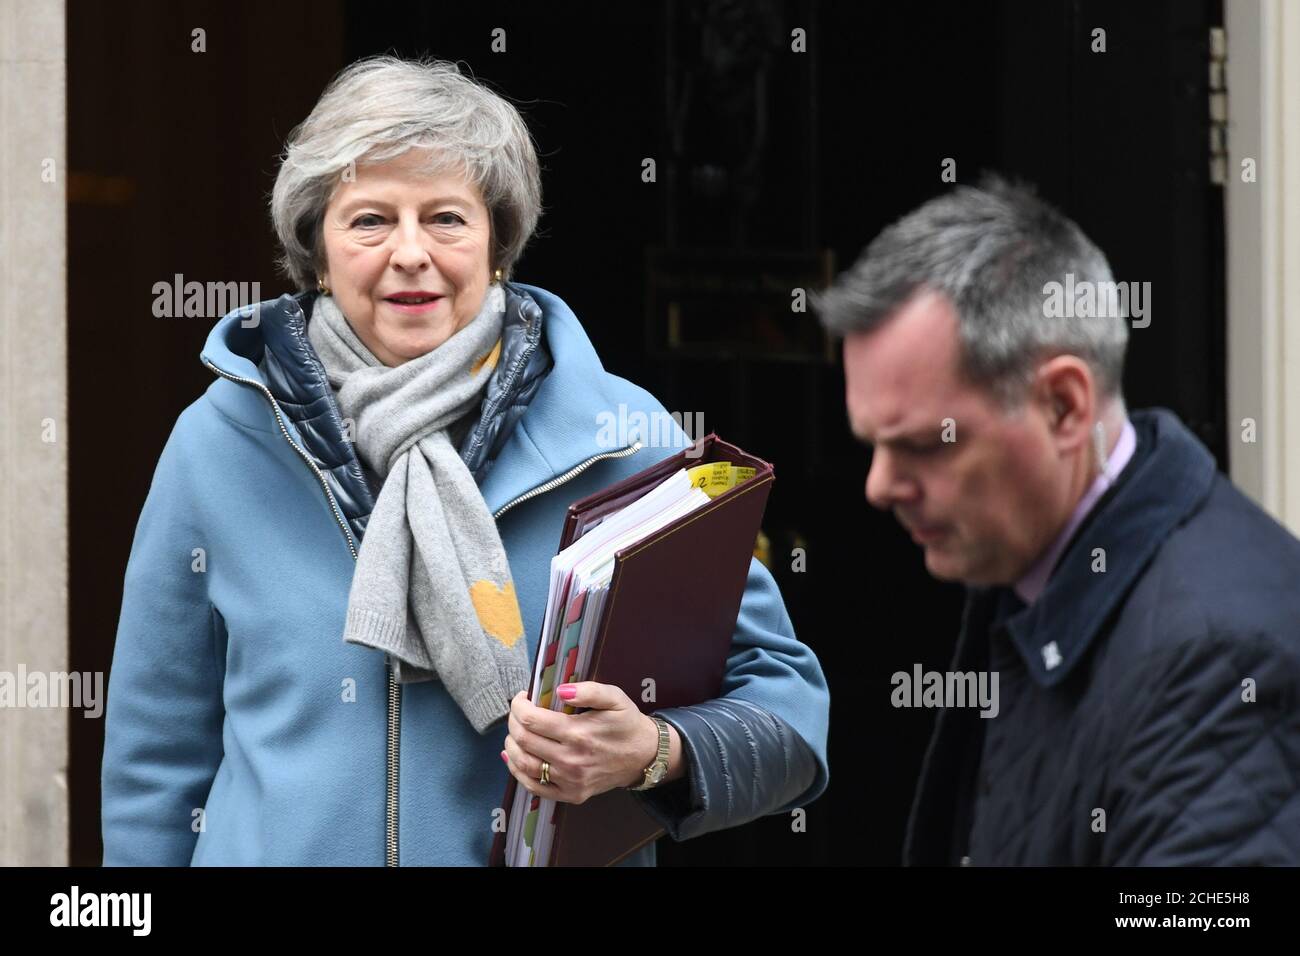 Prime Minister Theresa May leaves 10 Downing Street, London, for the House of Commons to face Prime Minister's Questions. Stock Photo